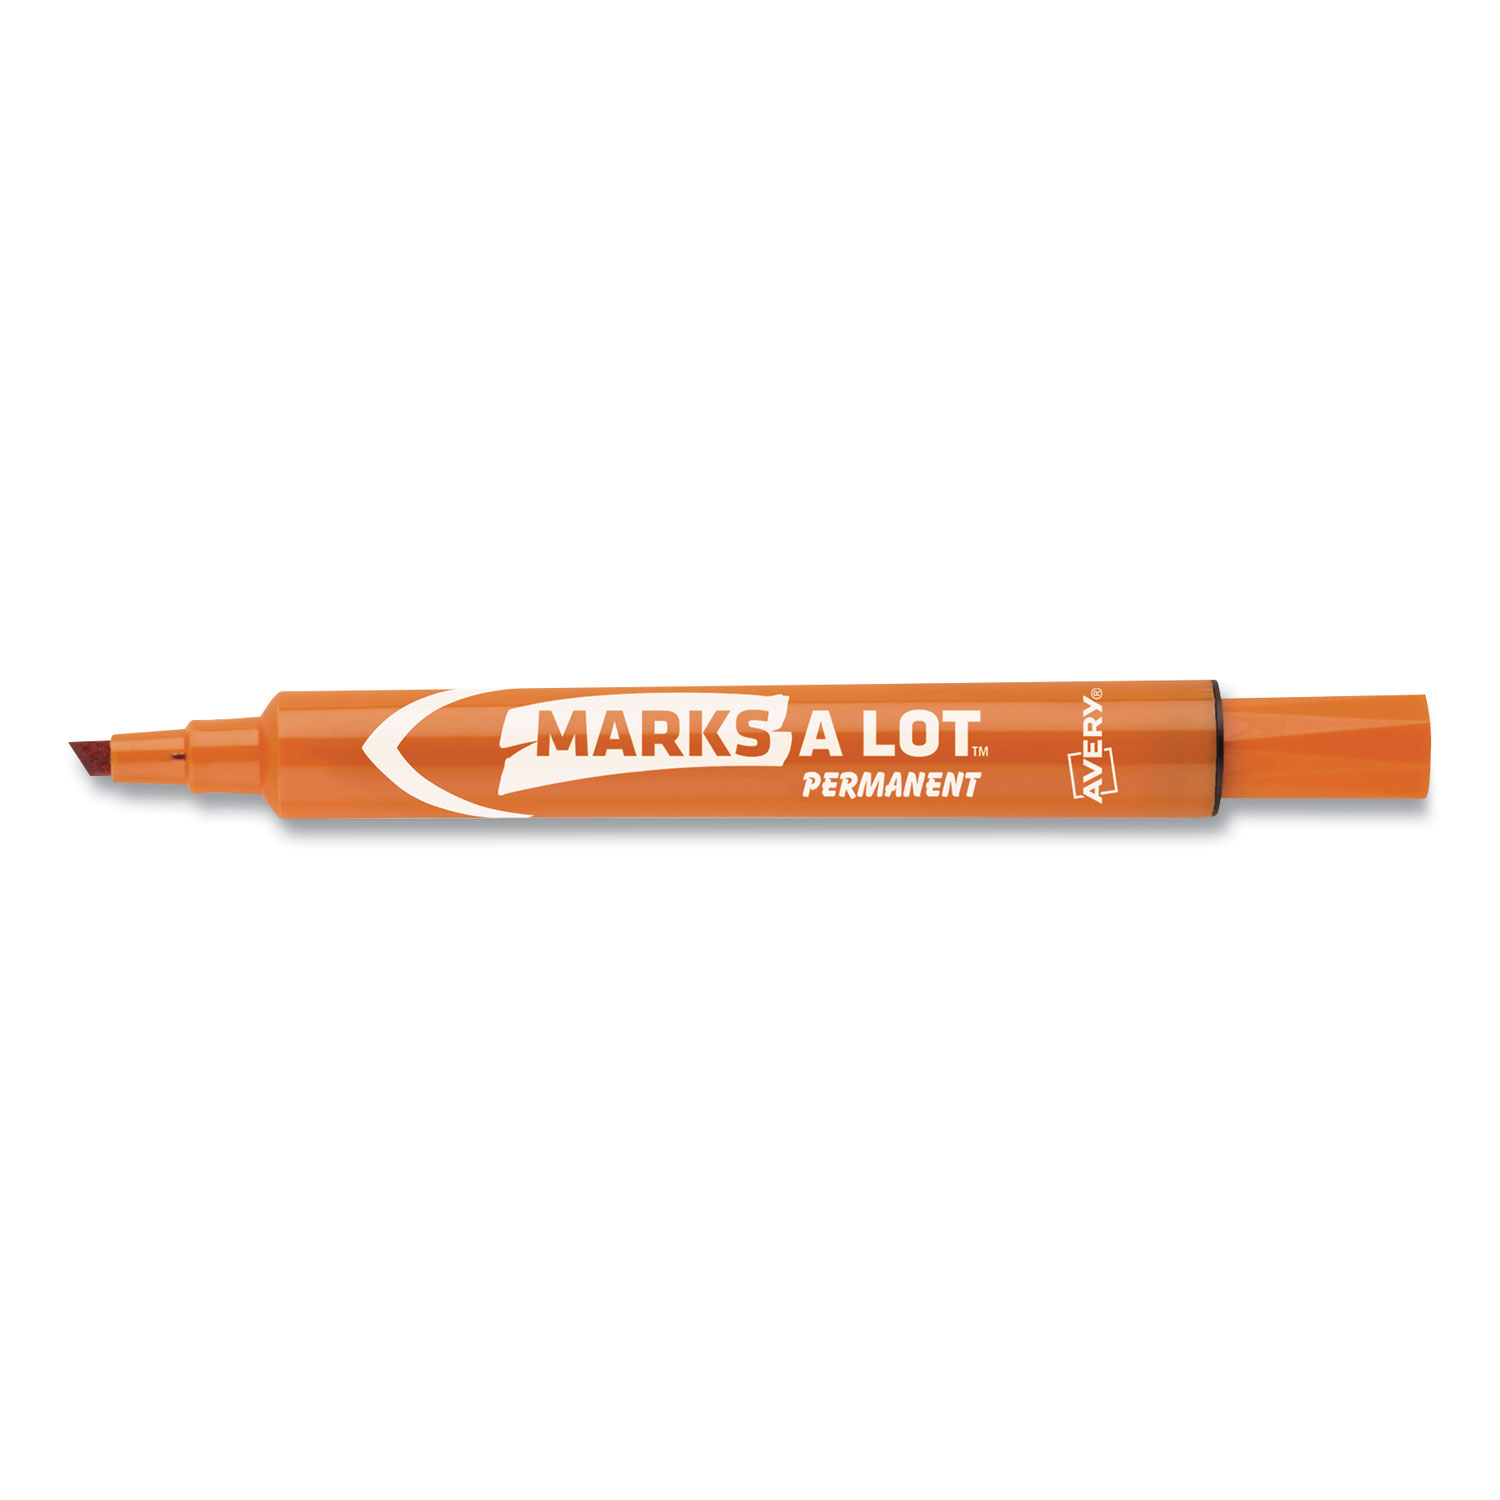 Avery Avery¬Æ Marks-A-Lot Permanent Marker, Large Chisel Tip, Black/Red  Ink, 24/Pack 98088